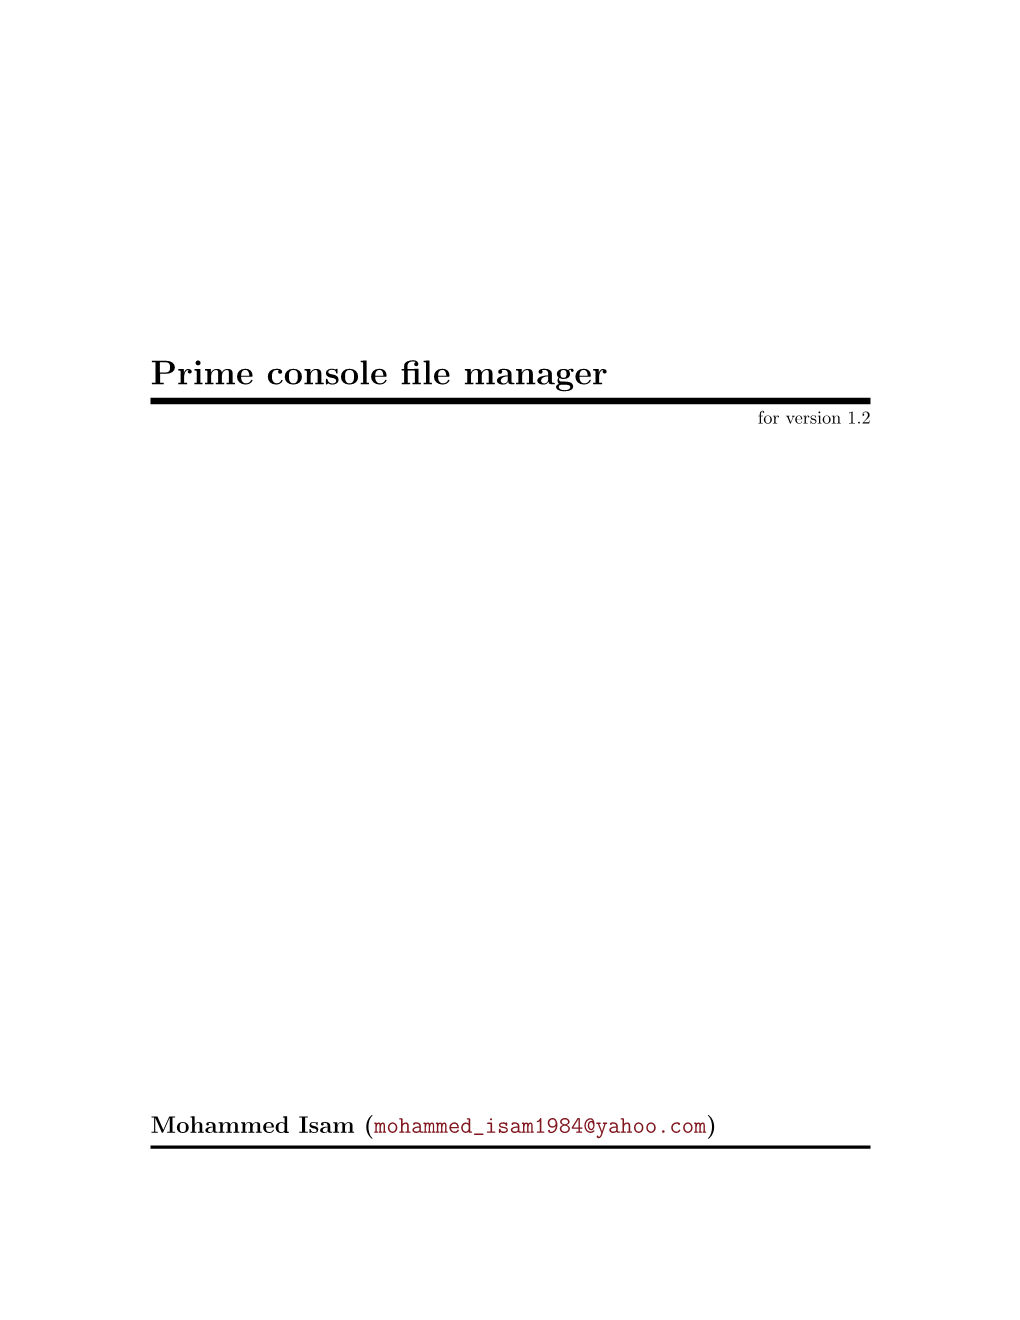 Prime Console File Manager for Version 1.2